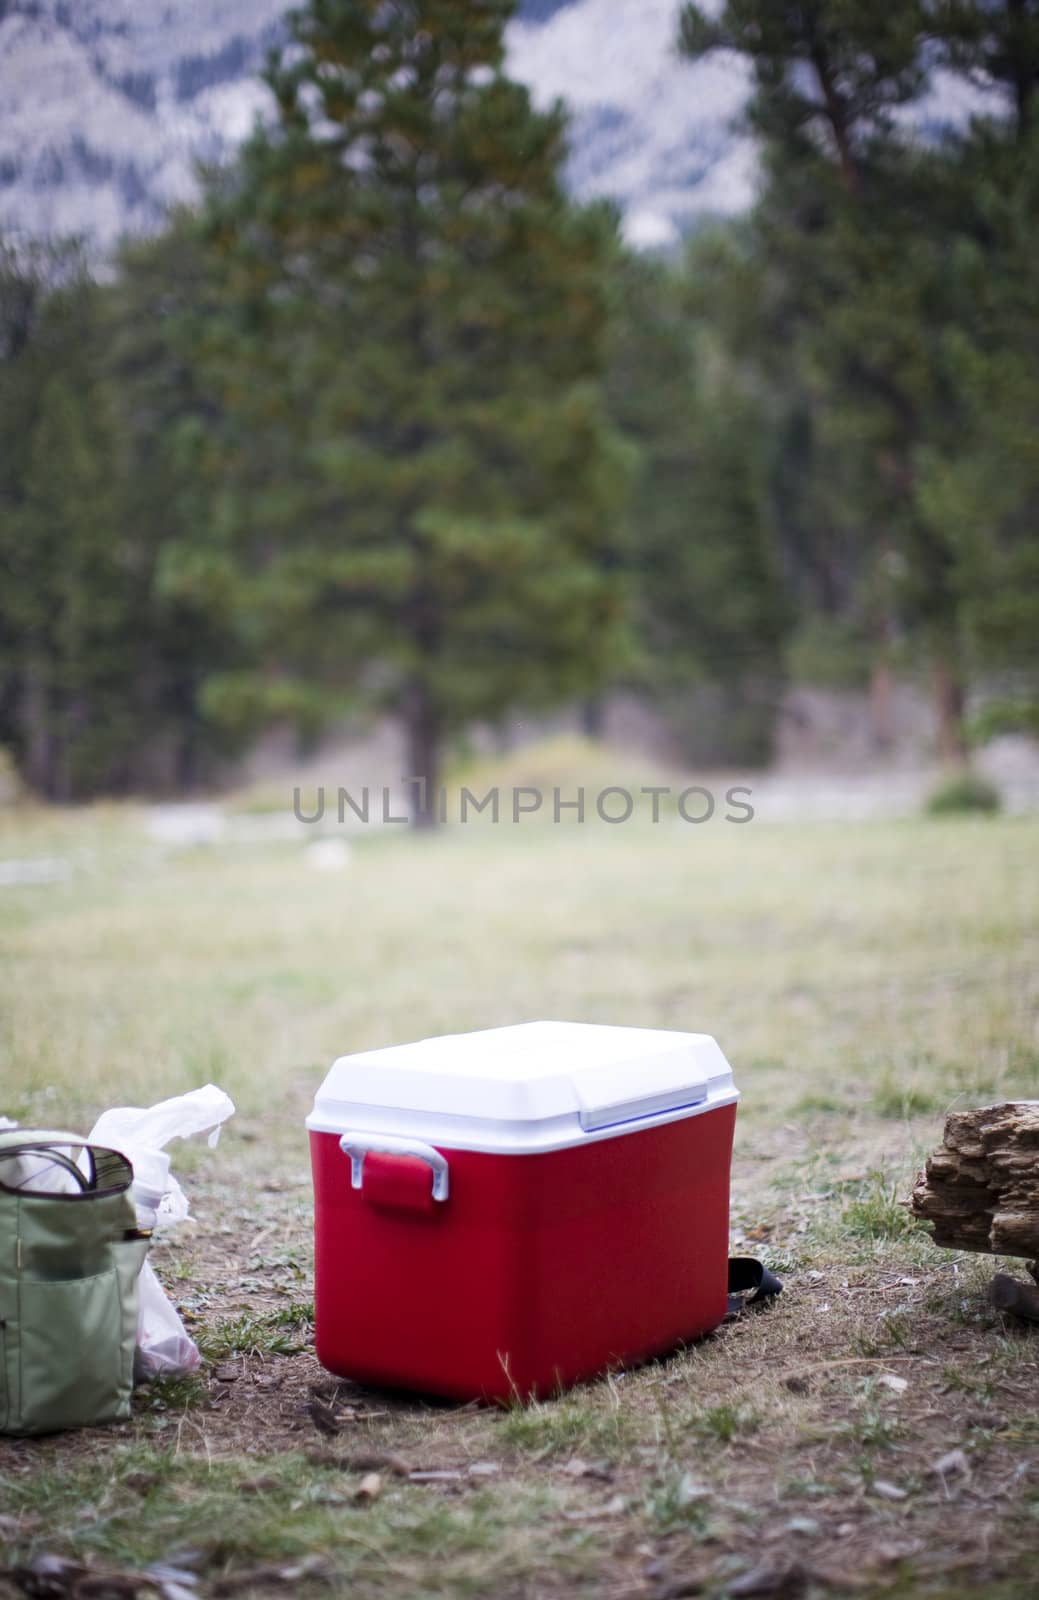 camping gear outside in the forest with the pine trees and the mountains in the background and a red cooler and bags in the foreground